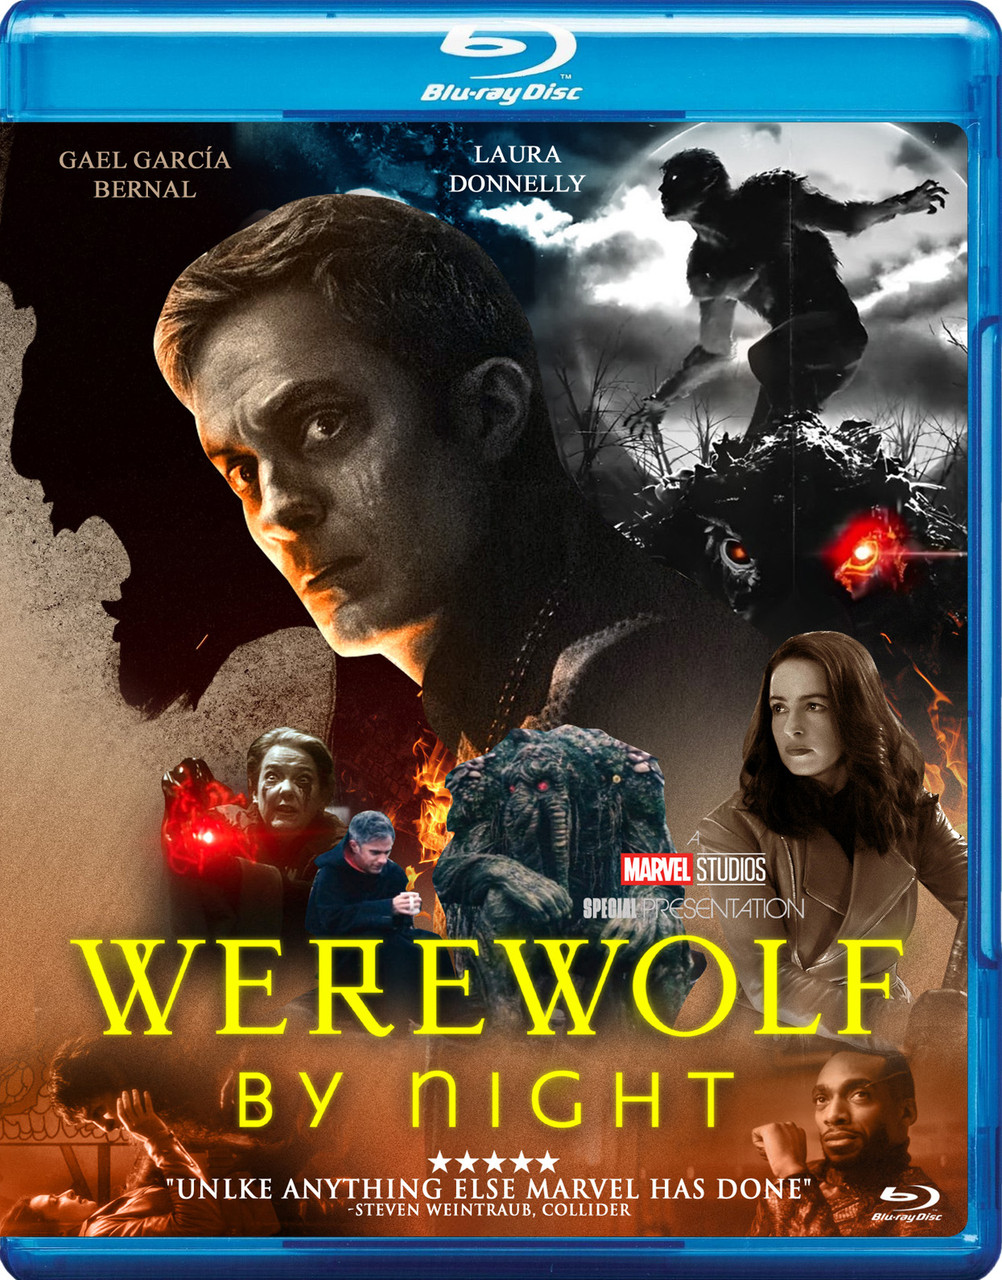 WEREWOLF BY NIGHT (Vinyl and Timed Edition Poster) (On-Sale Info